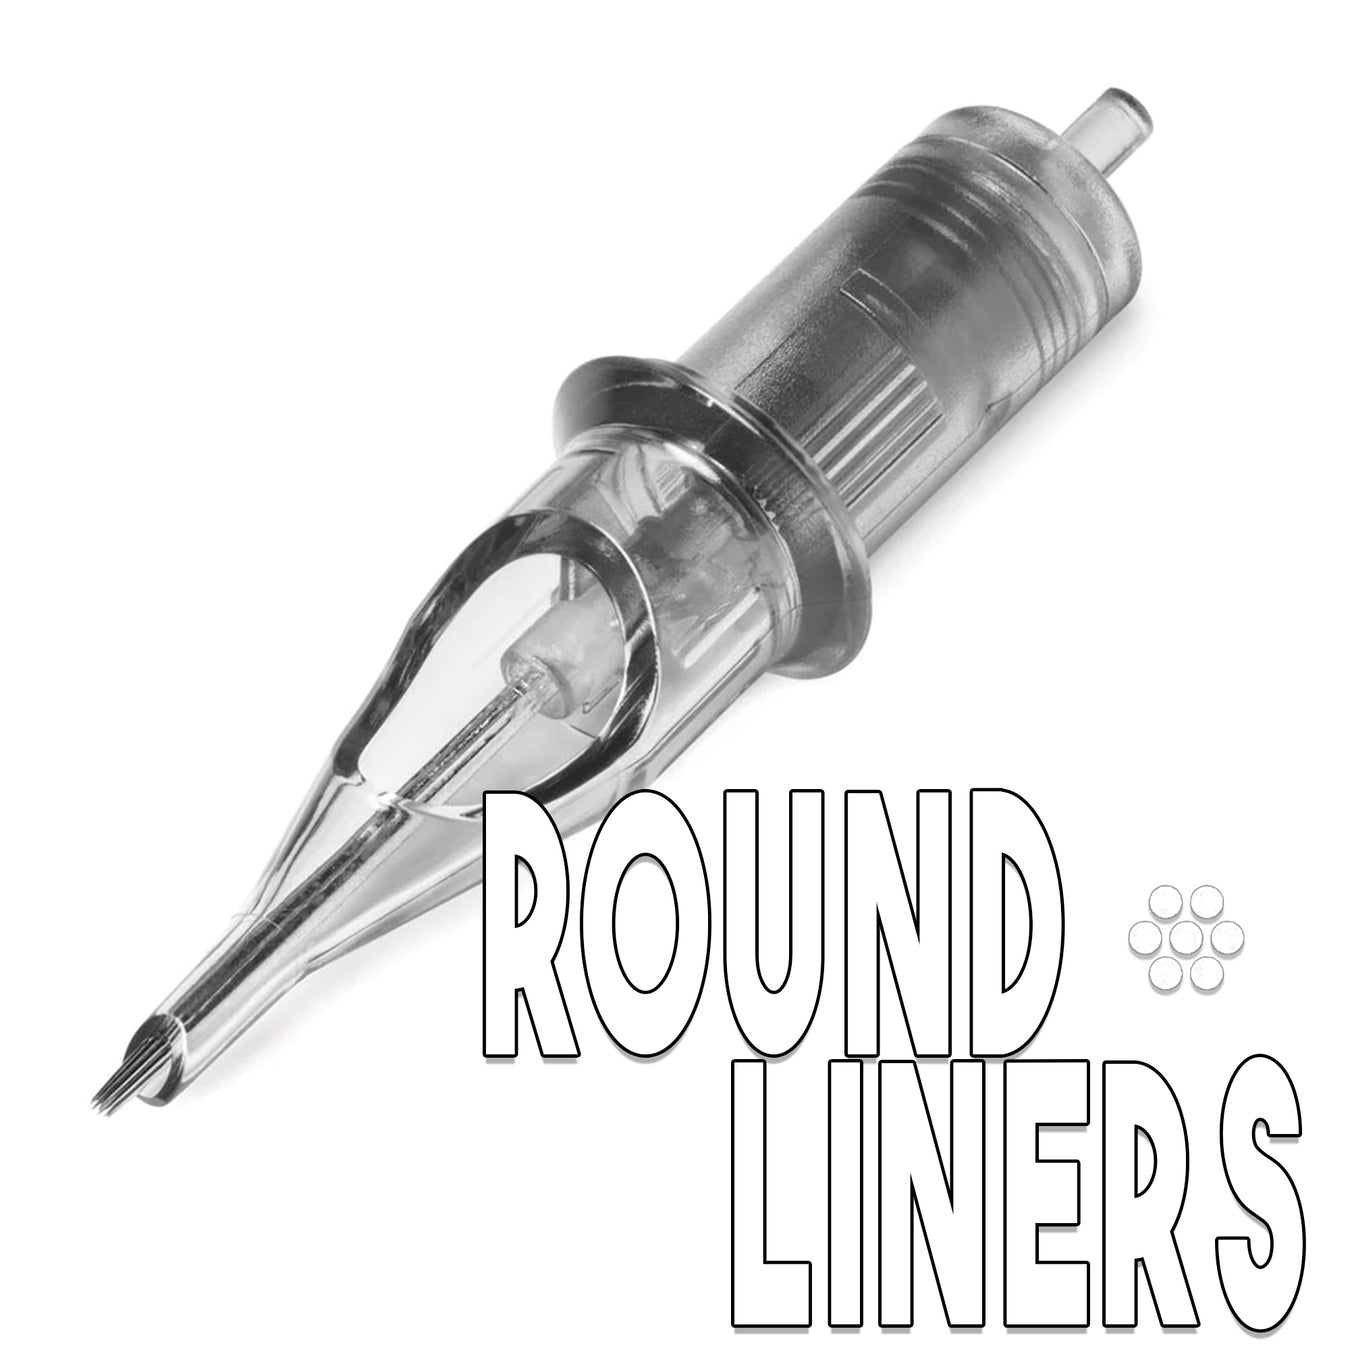 Round Liners